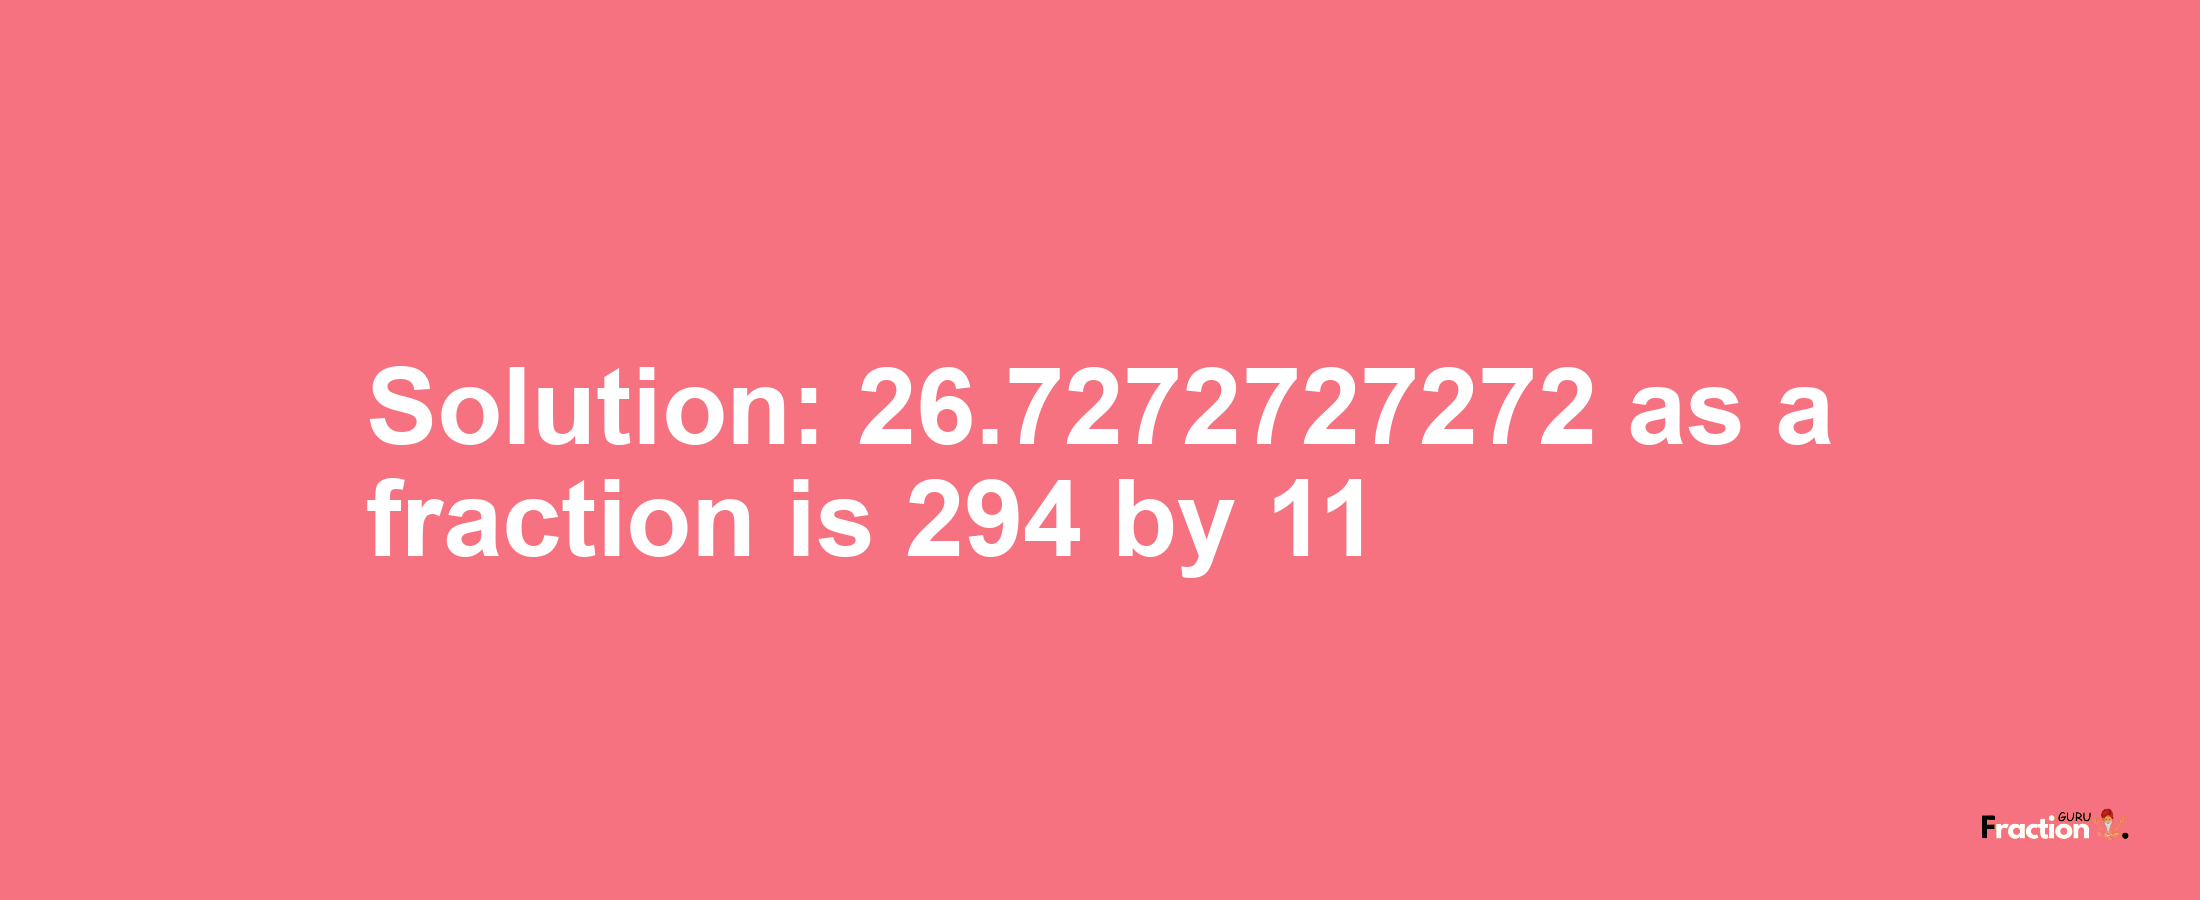 Solution:26.7272727272 as a fraction is 294/11